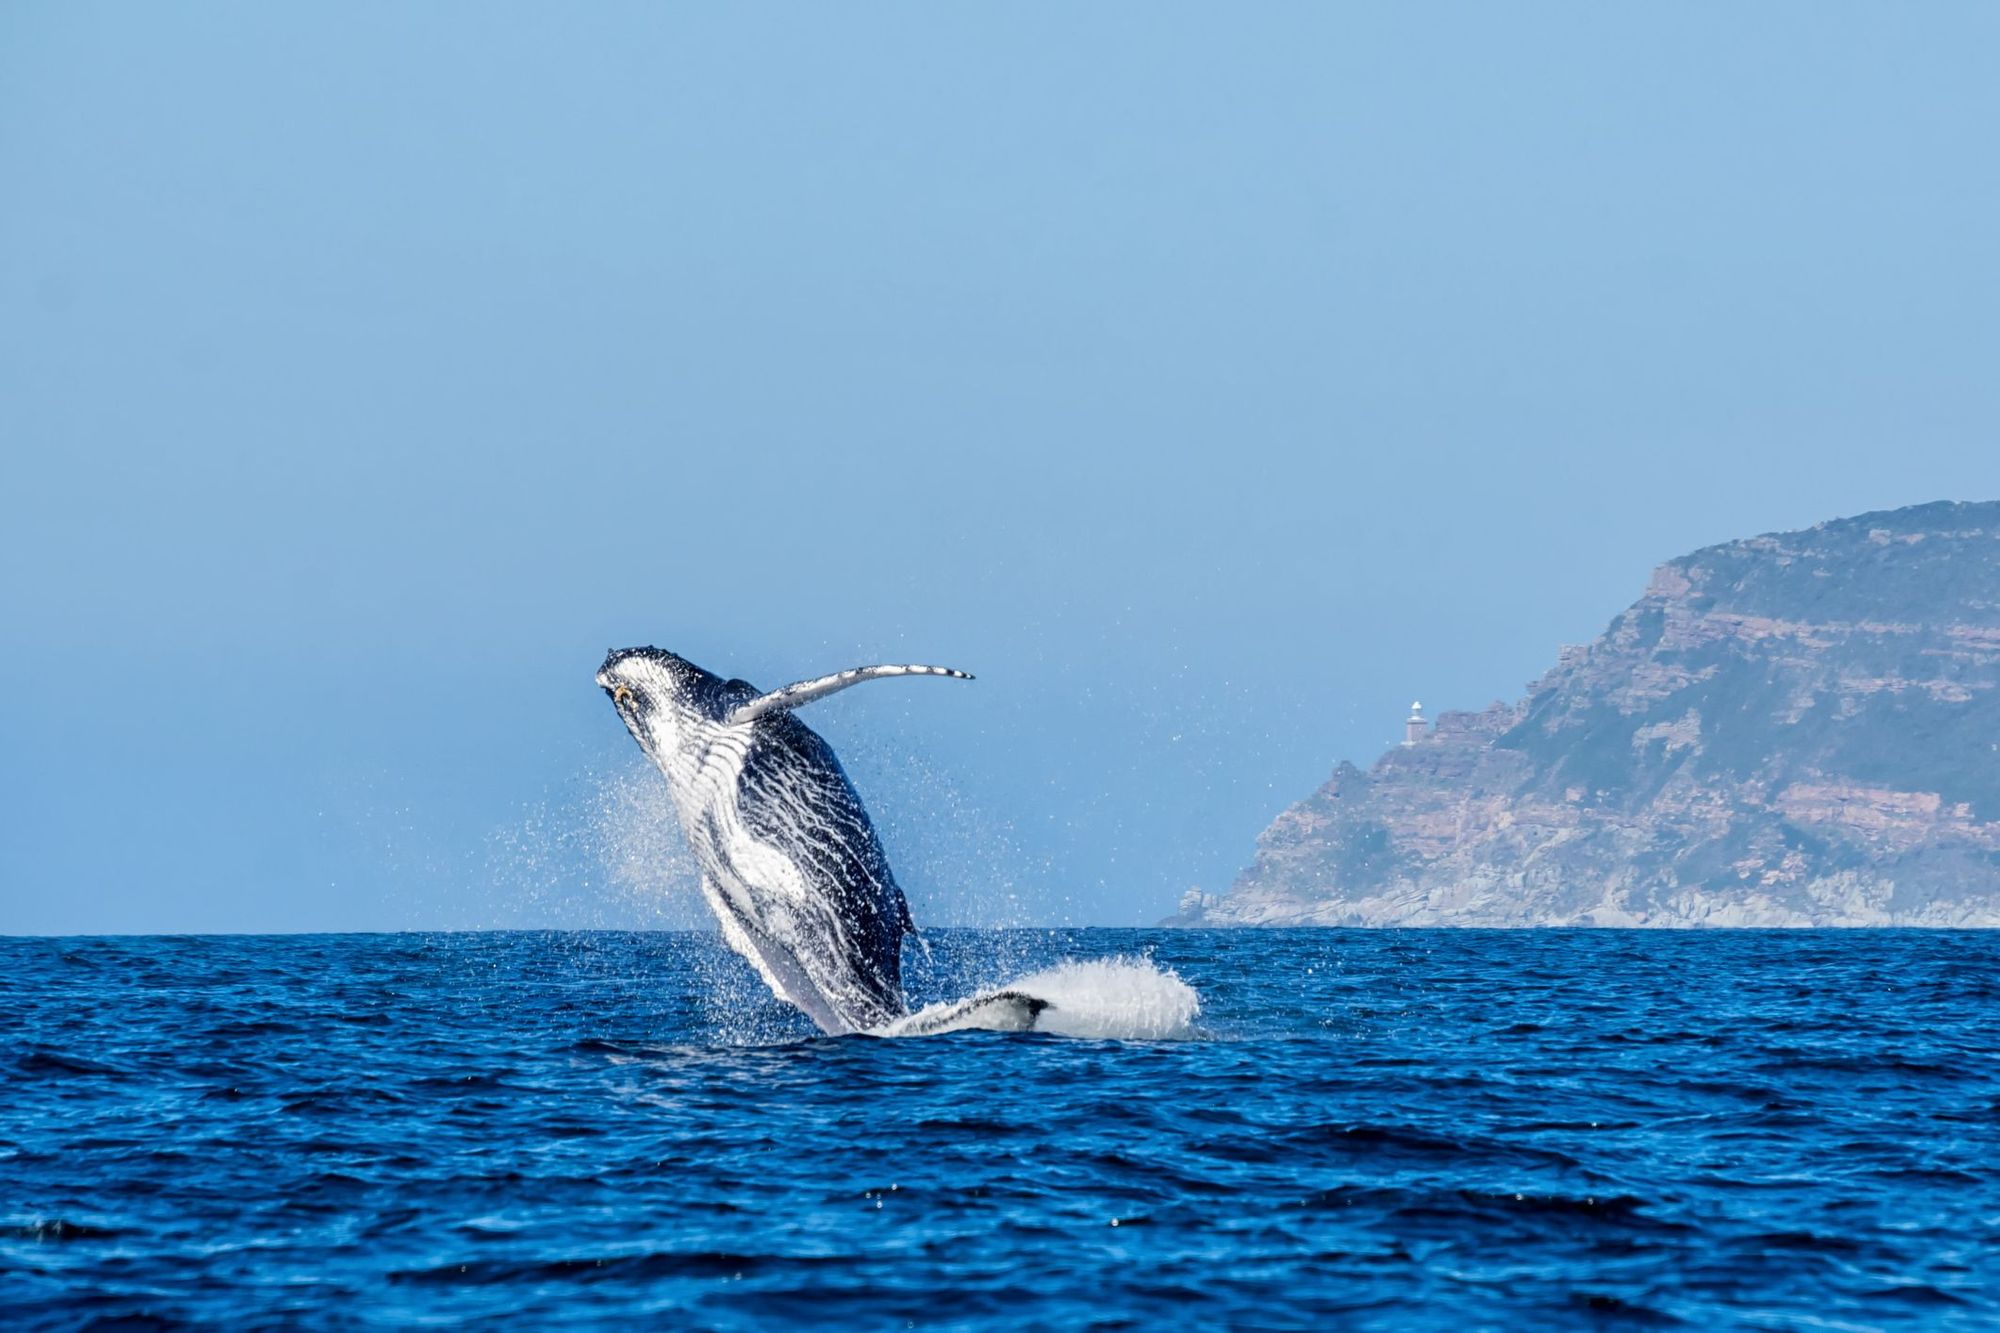 A humpback whale breaches the water in South Africa.